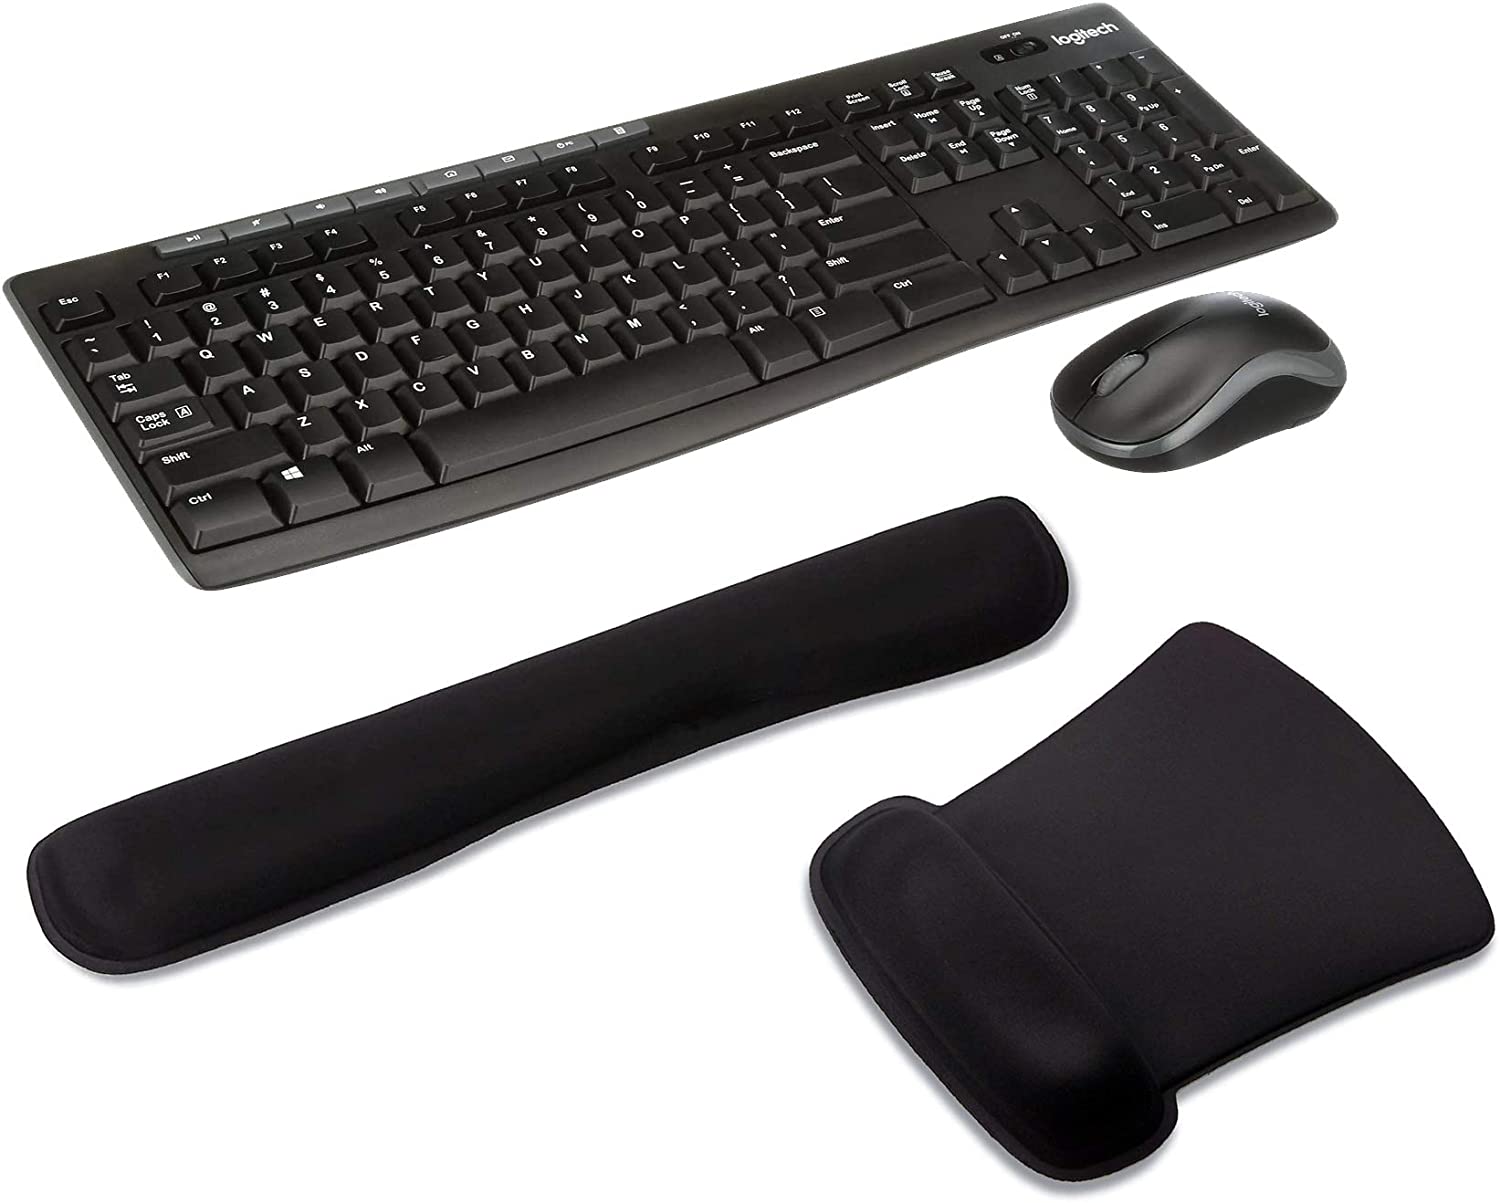 Best college electronics: logitech wireless keyboard and mouse